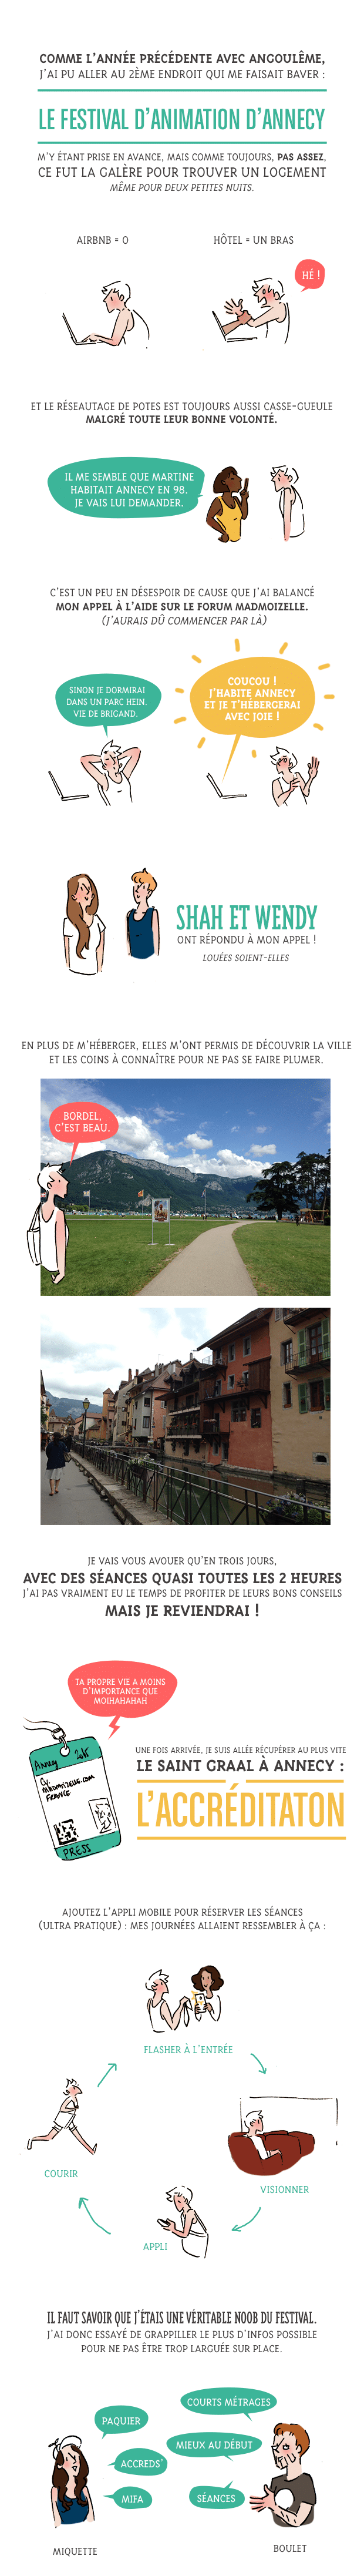 festival-animation-annecy-1